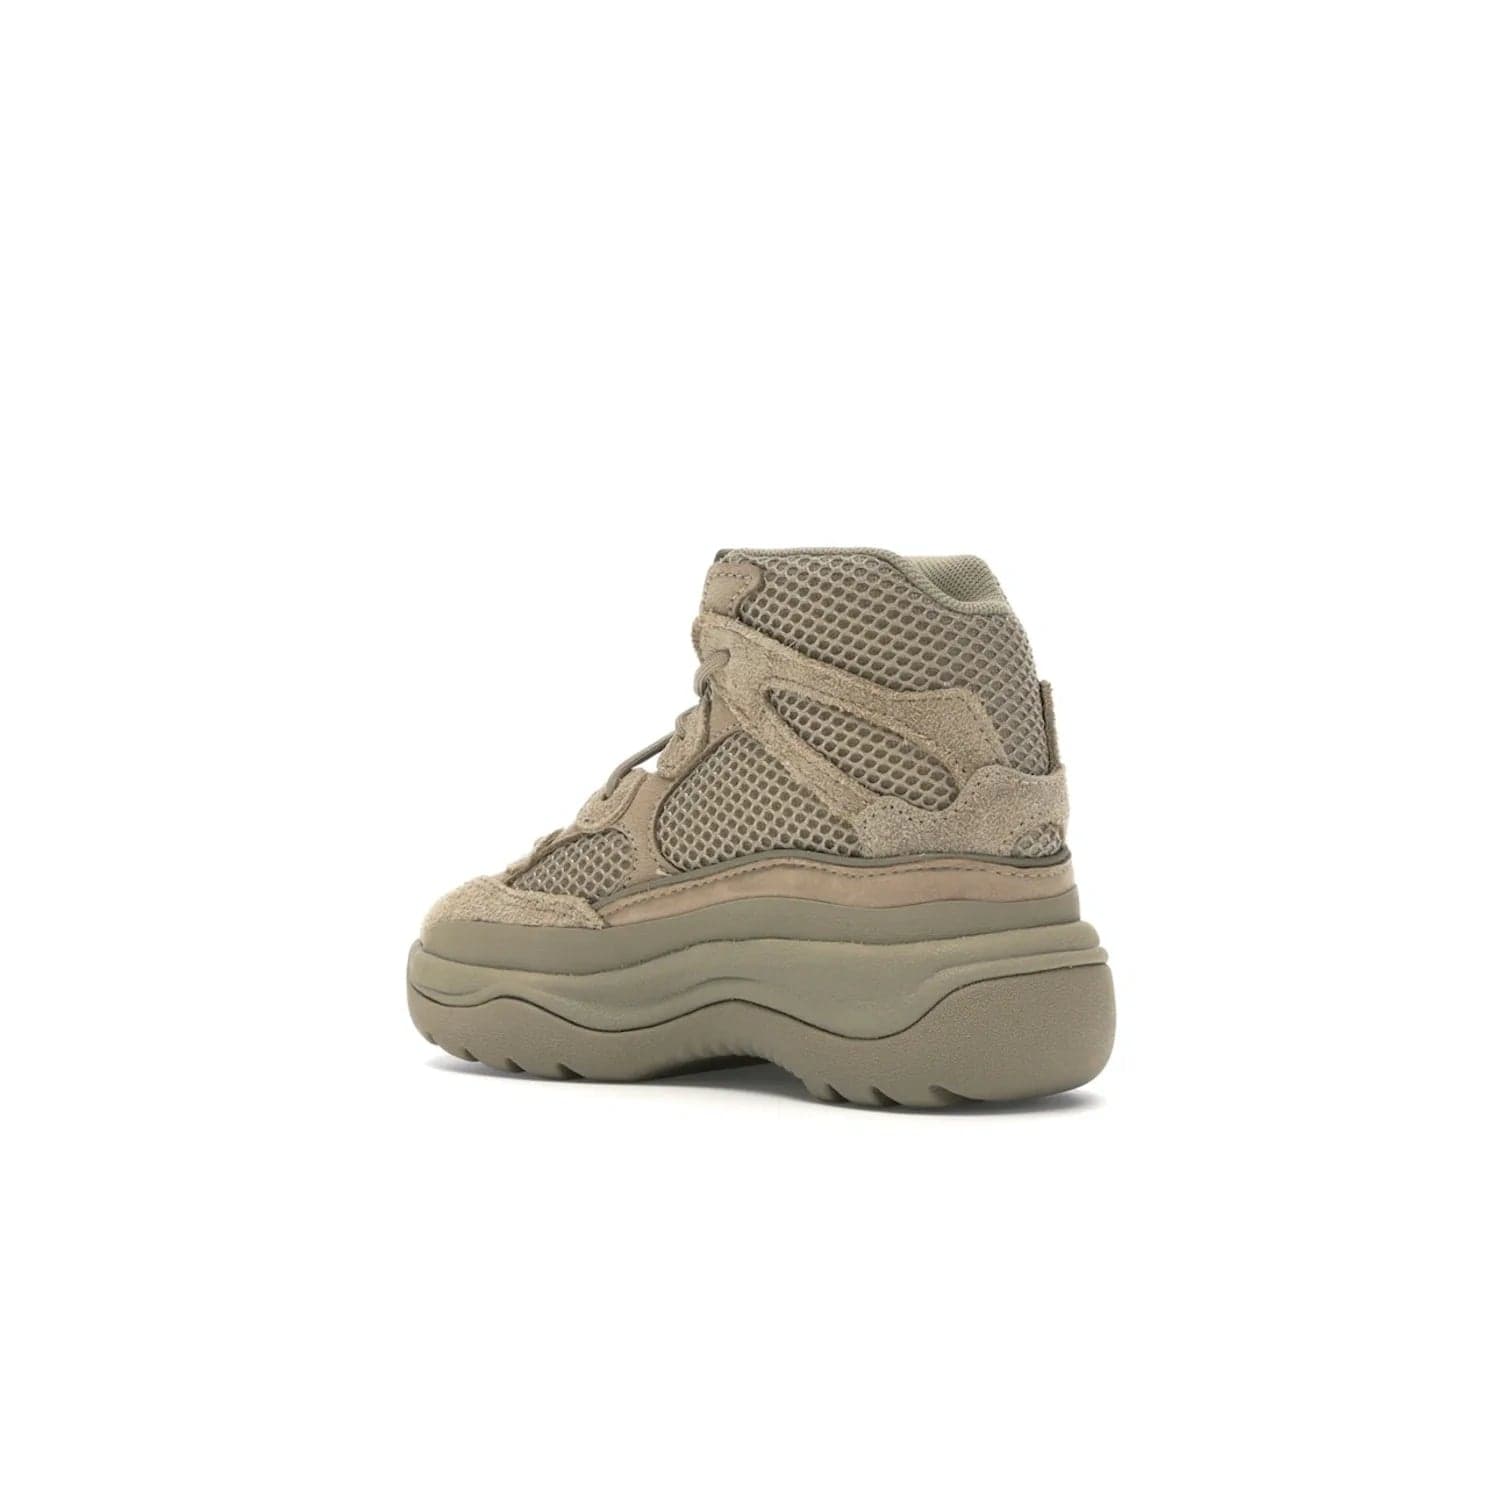 adidas Yeezy Desert Boot Rock (Kids) - Image 23 - Only at www.BallersClubKickz.com - Elevate your style this season with the adidas Yeezy Desert Boot Rock. Crafted from layered nylon and suede, this chic kids' silhouette features an EVA midsole and rubber outsole for superior cushioning and traction.